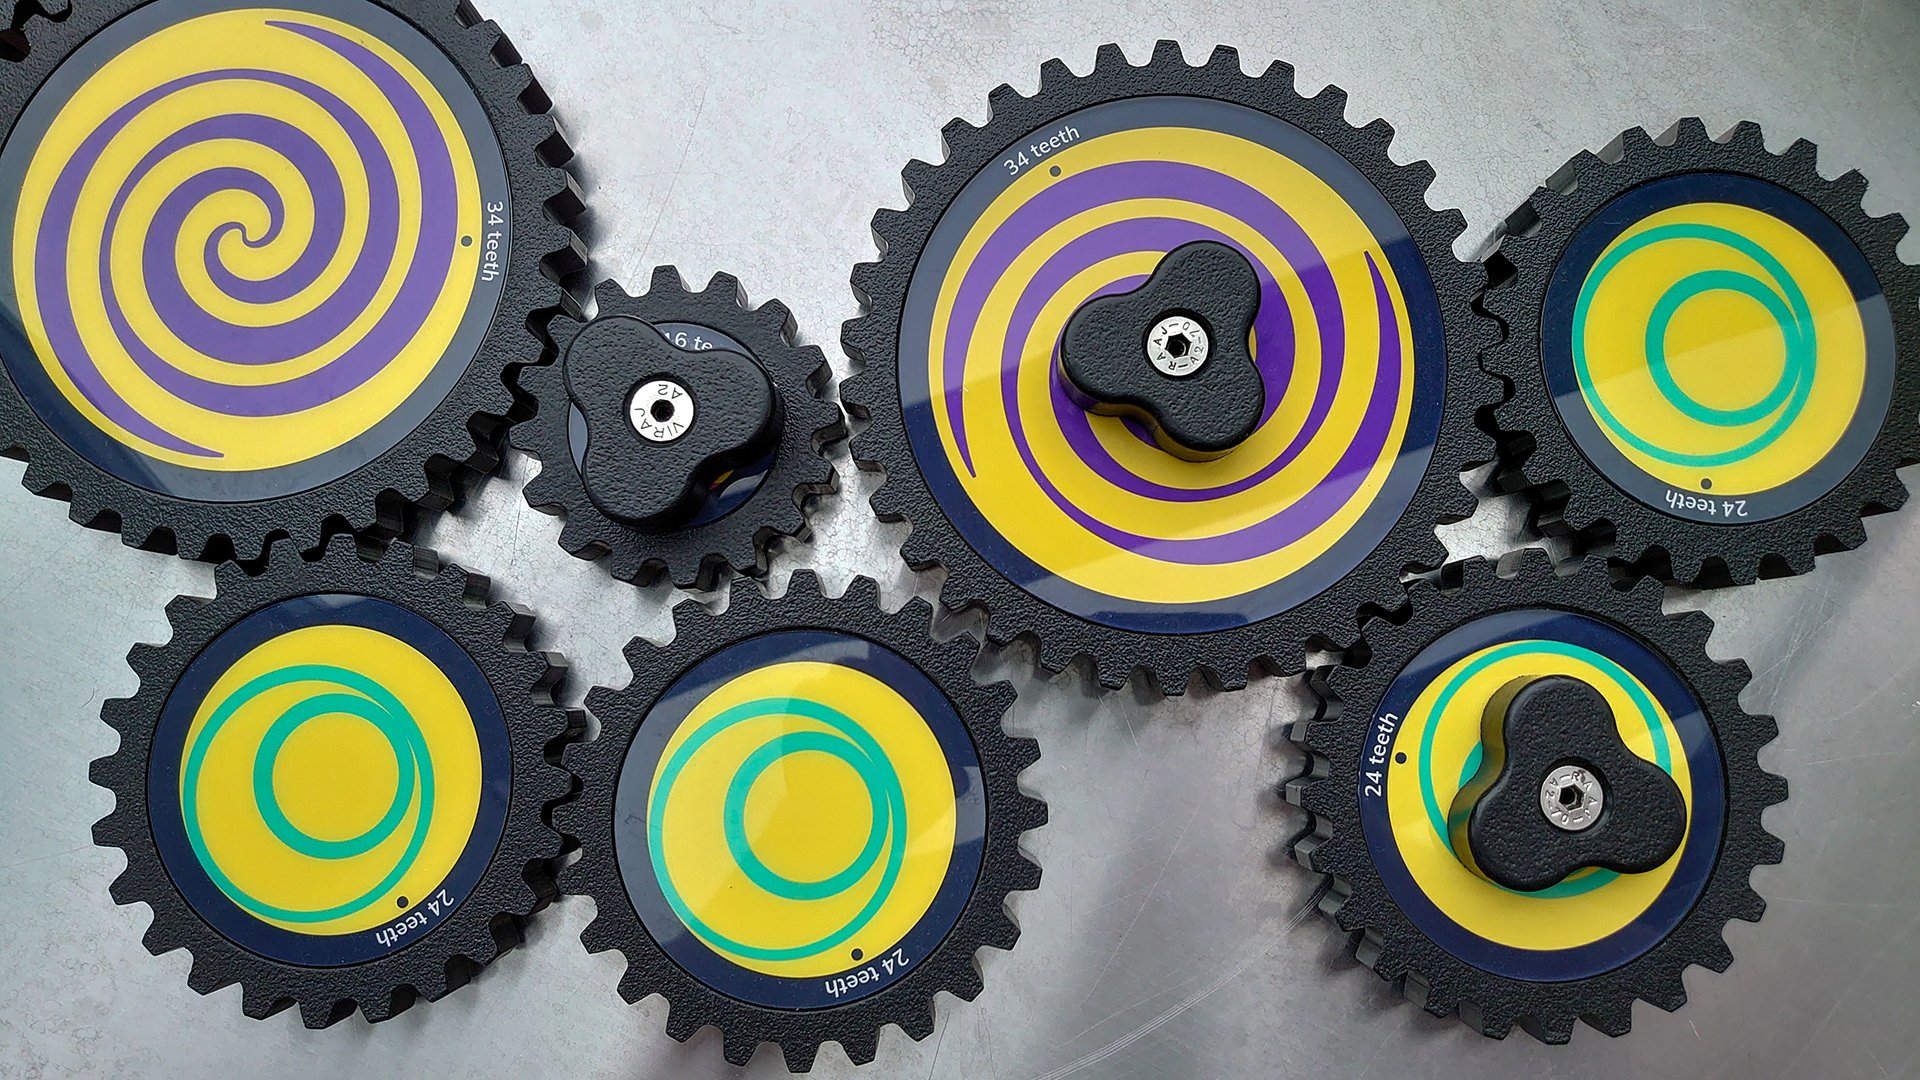 An array of cogs ready to be turned by hand